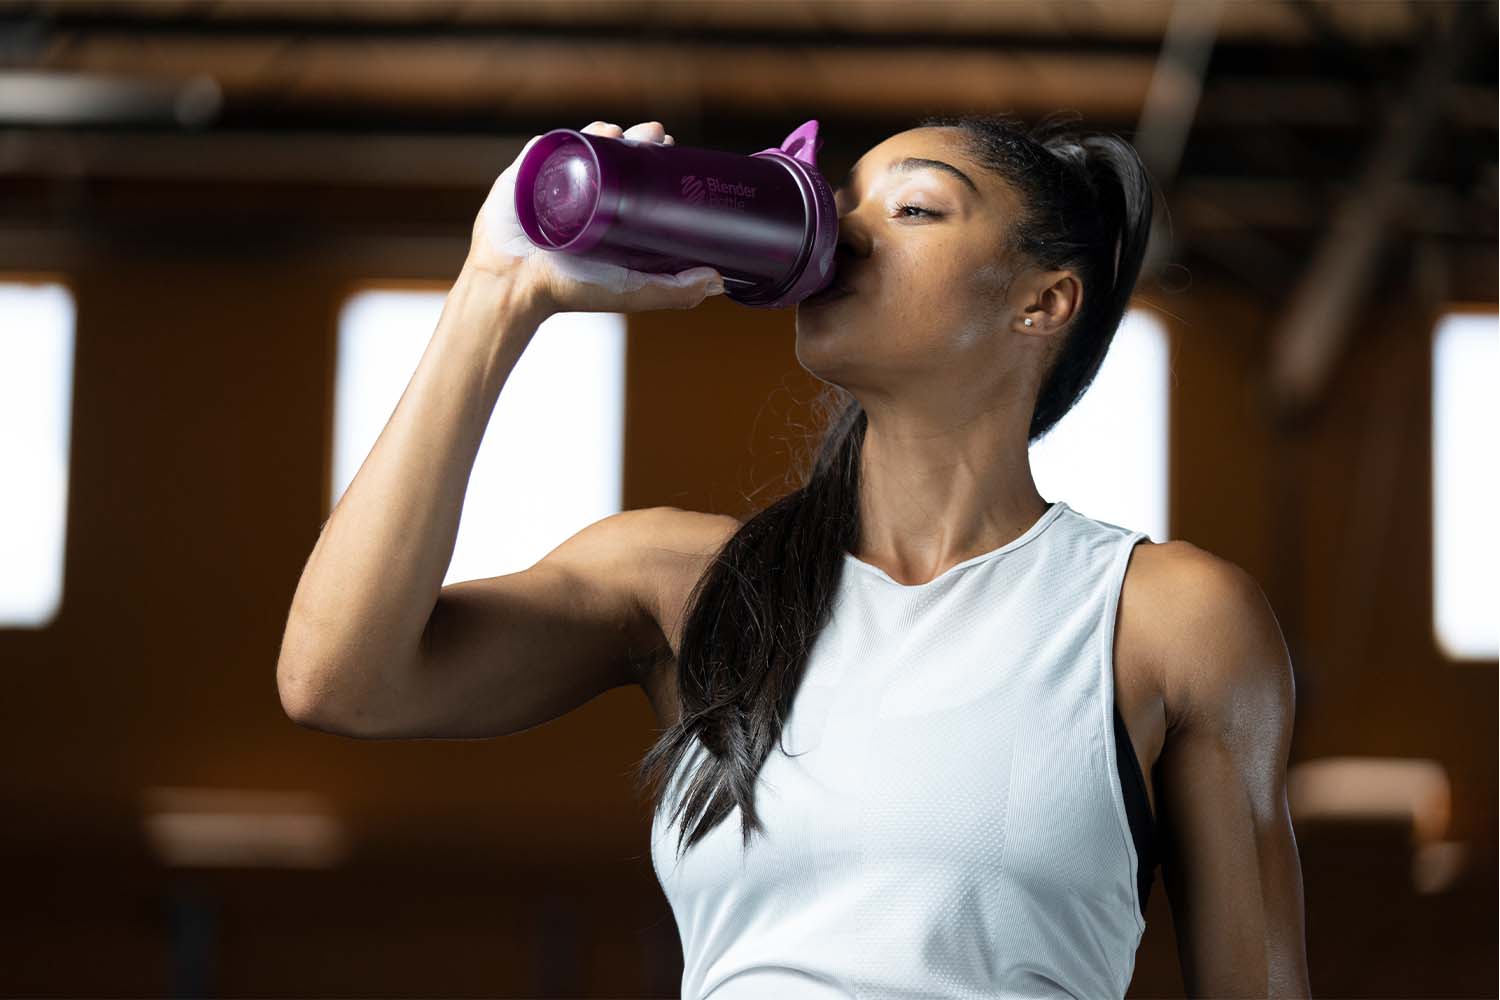 An image of a woman drinking out of a plum-colored BlenderBottle shaker cup in the gym. The woman is holding the cup with one hand and is seen taking a drink through the drinking spout. The cup has a leak-proof design, with a twist-on cap and a flip cap that snaps securely in place. 